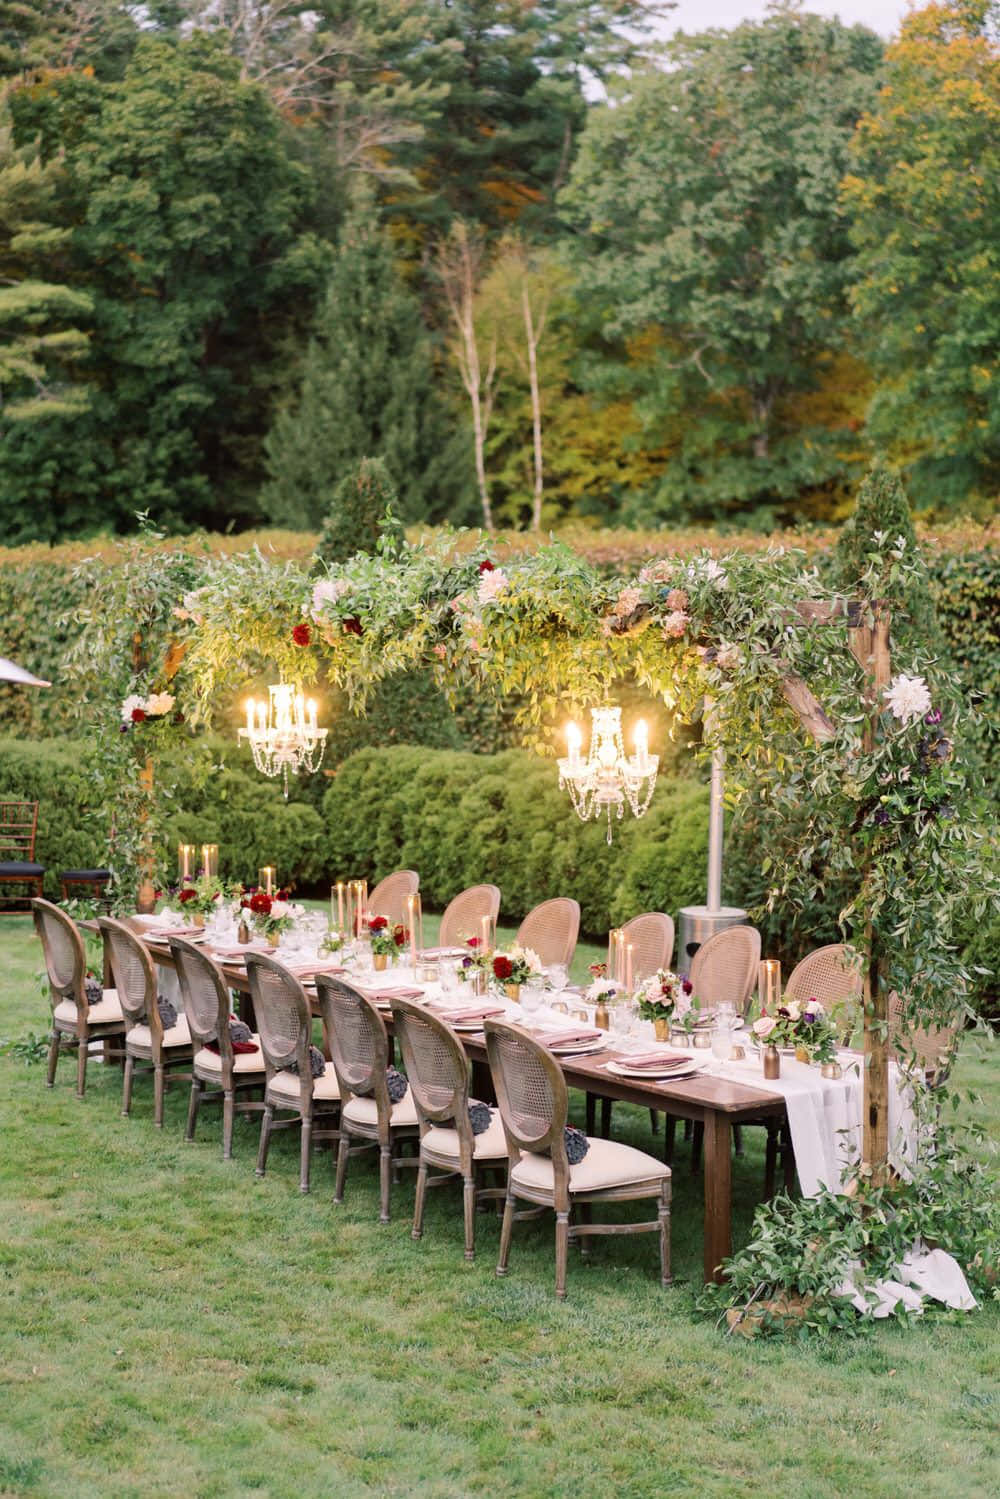 A Long Table Set Up In A Grassy Yard